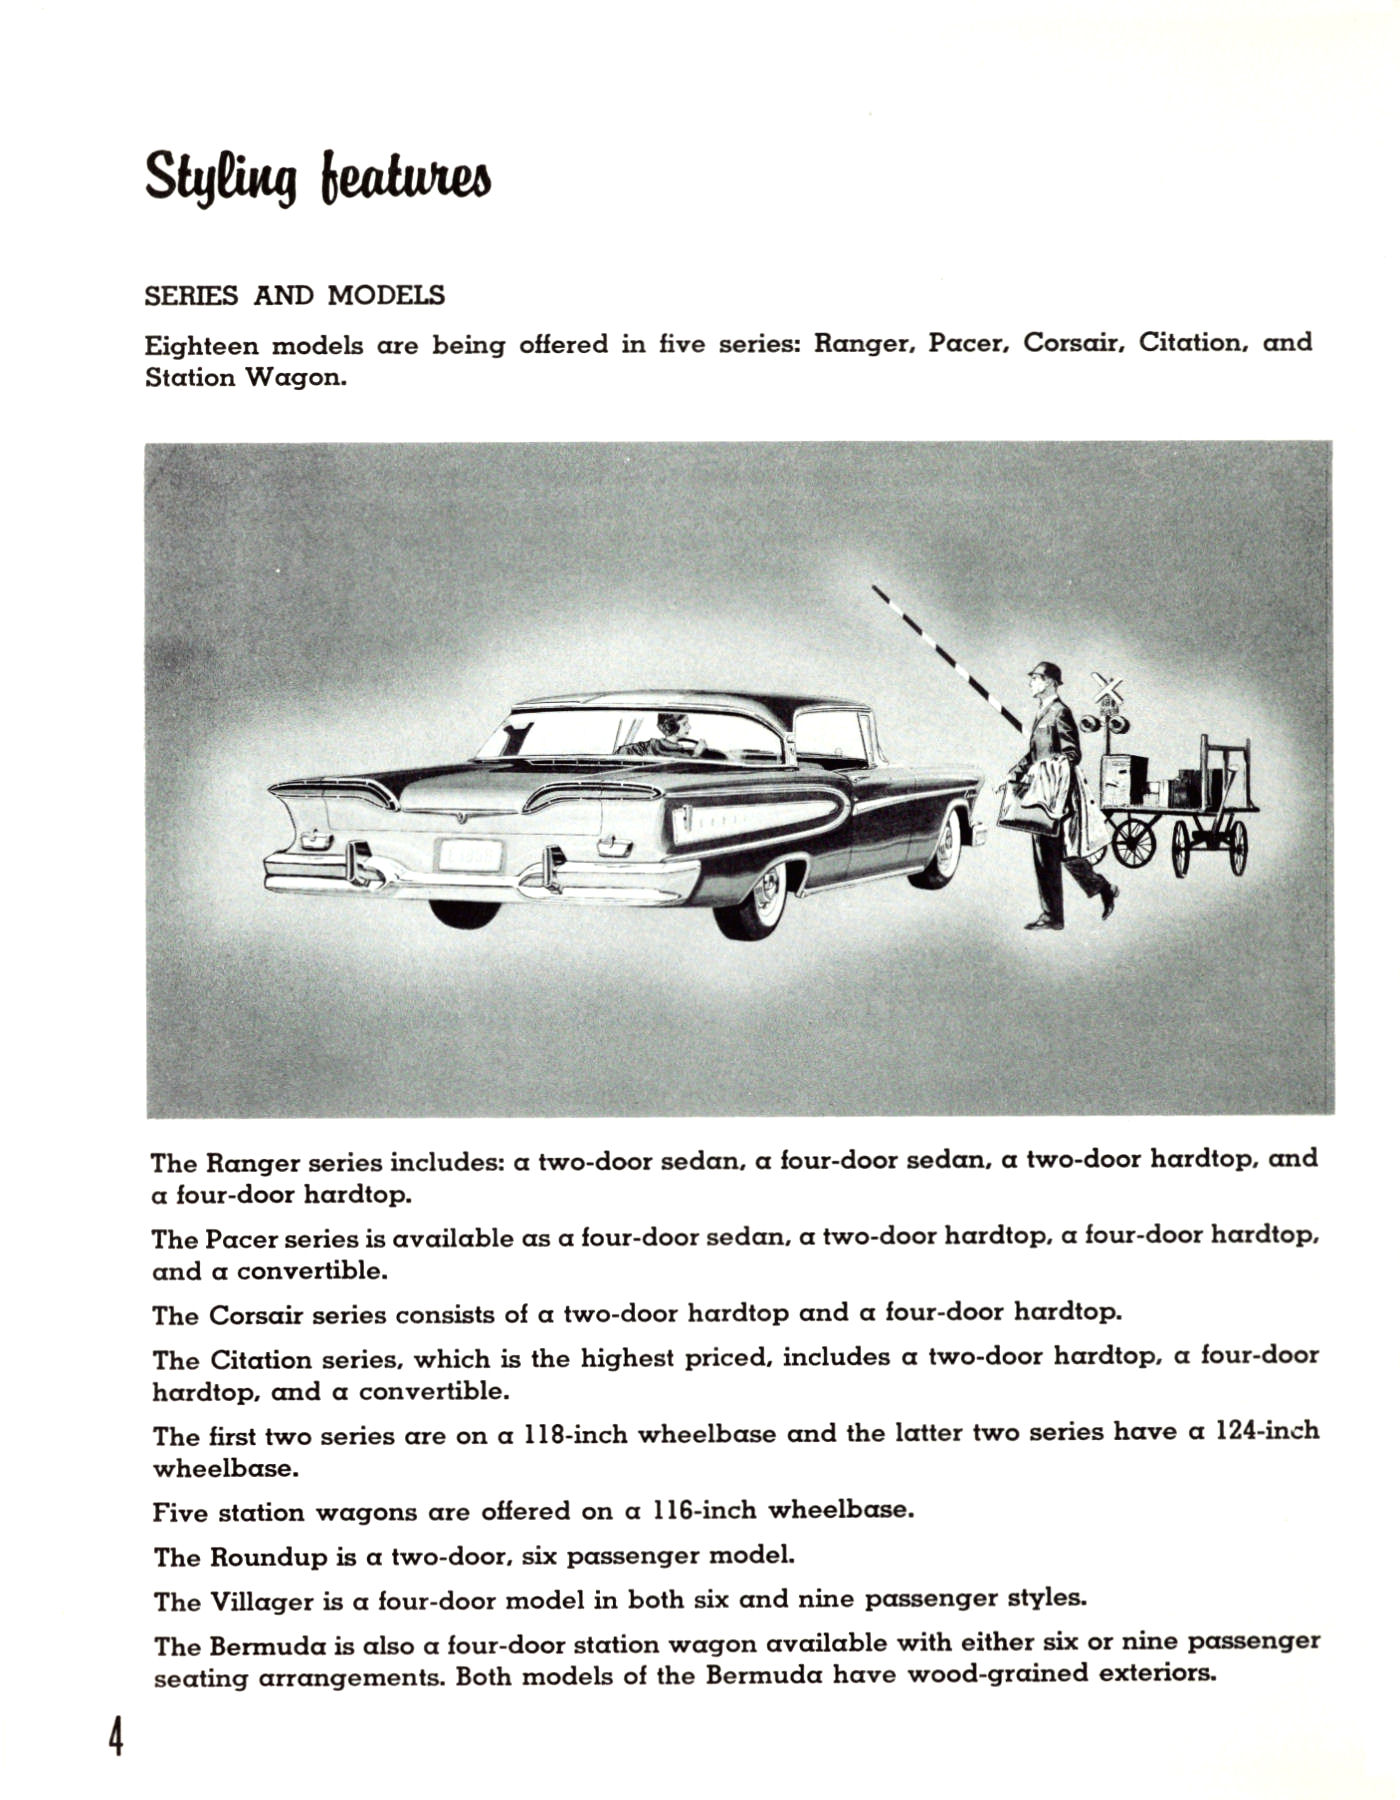 1958 Edsel Features-04